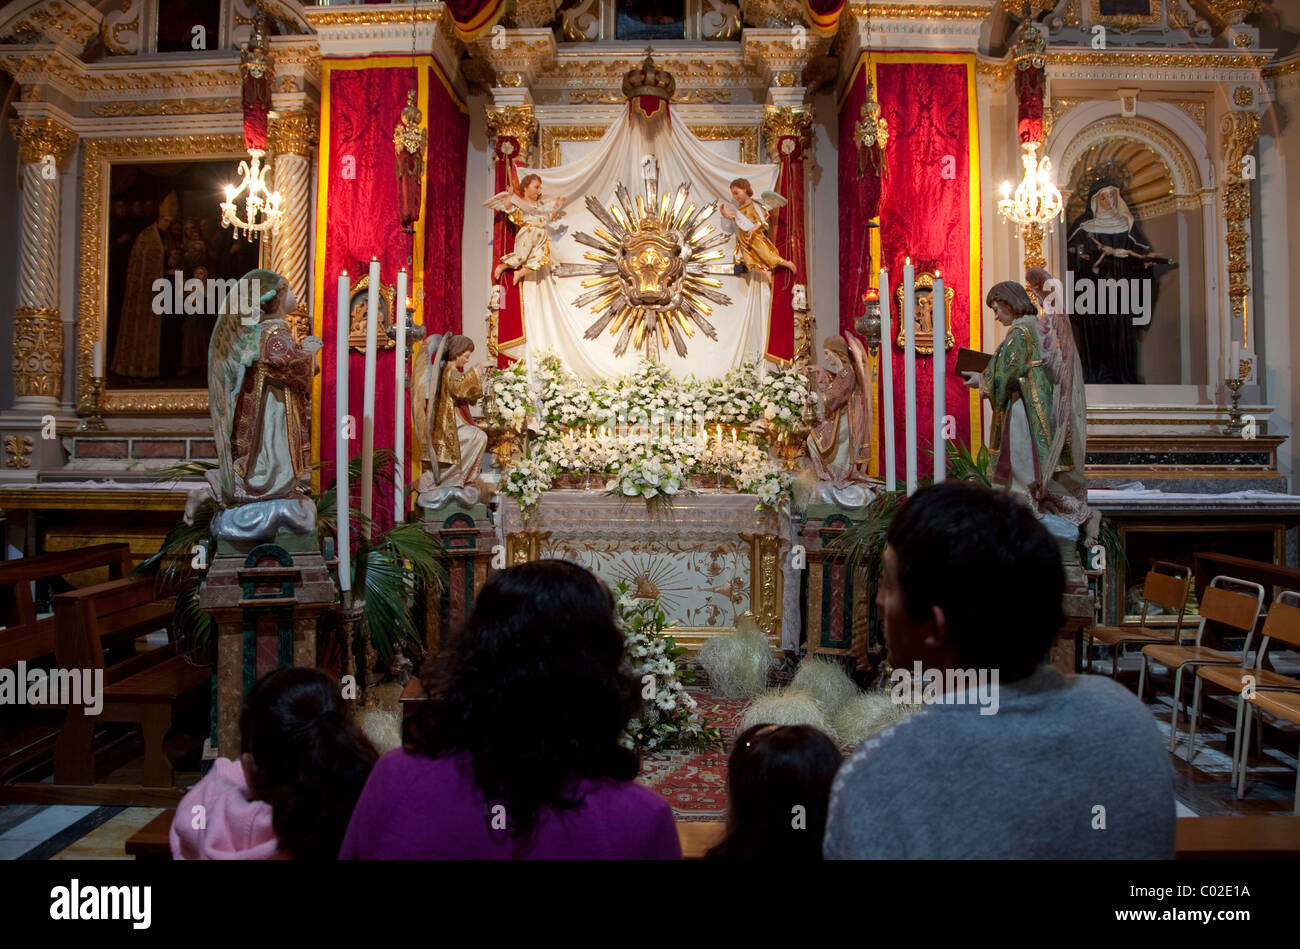 A family admire the splendour of the sepulchre exhibition that is set up in churches in Malta on eve of Good Friday. Stock Photo